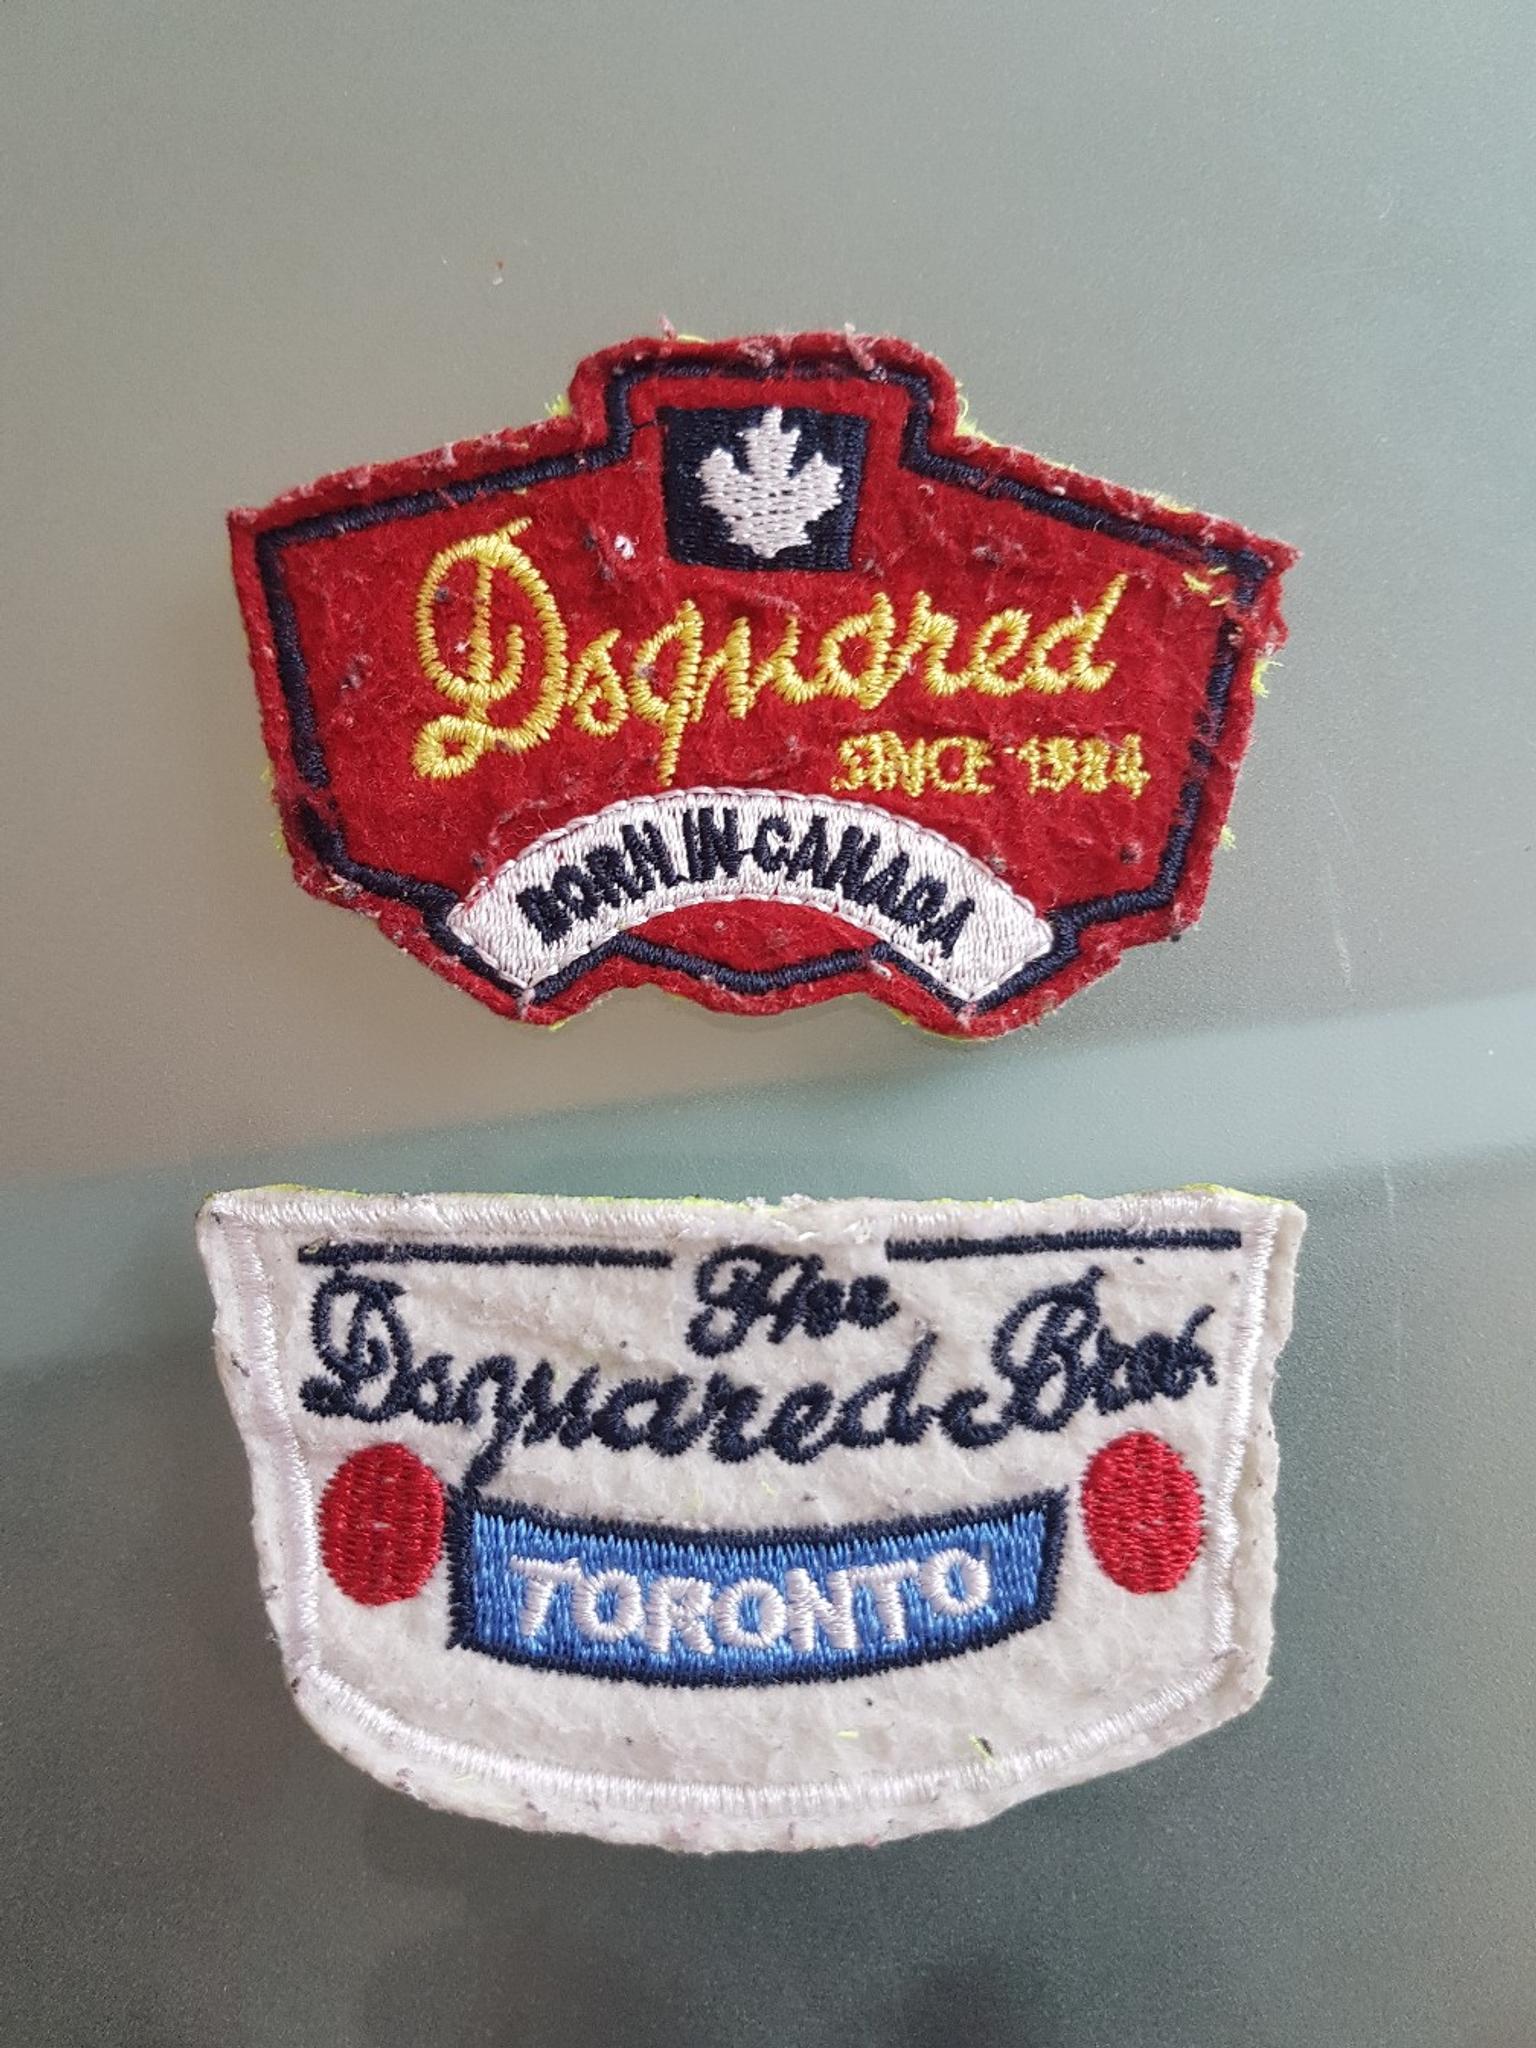 patch dsquared